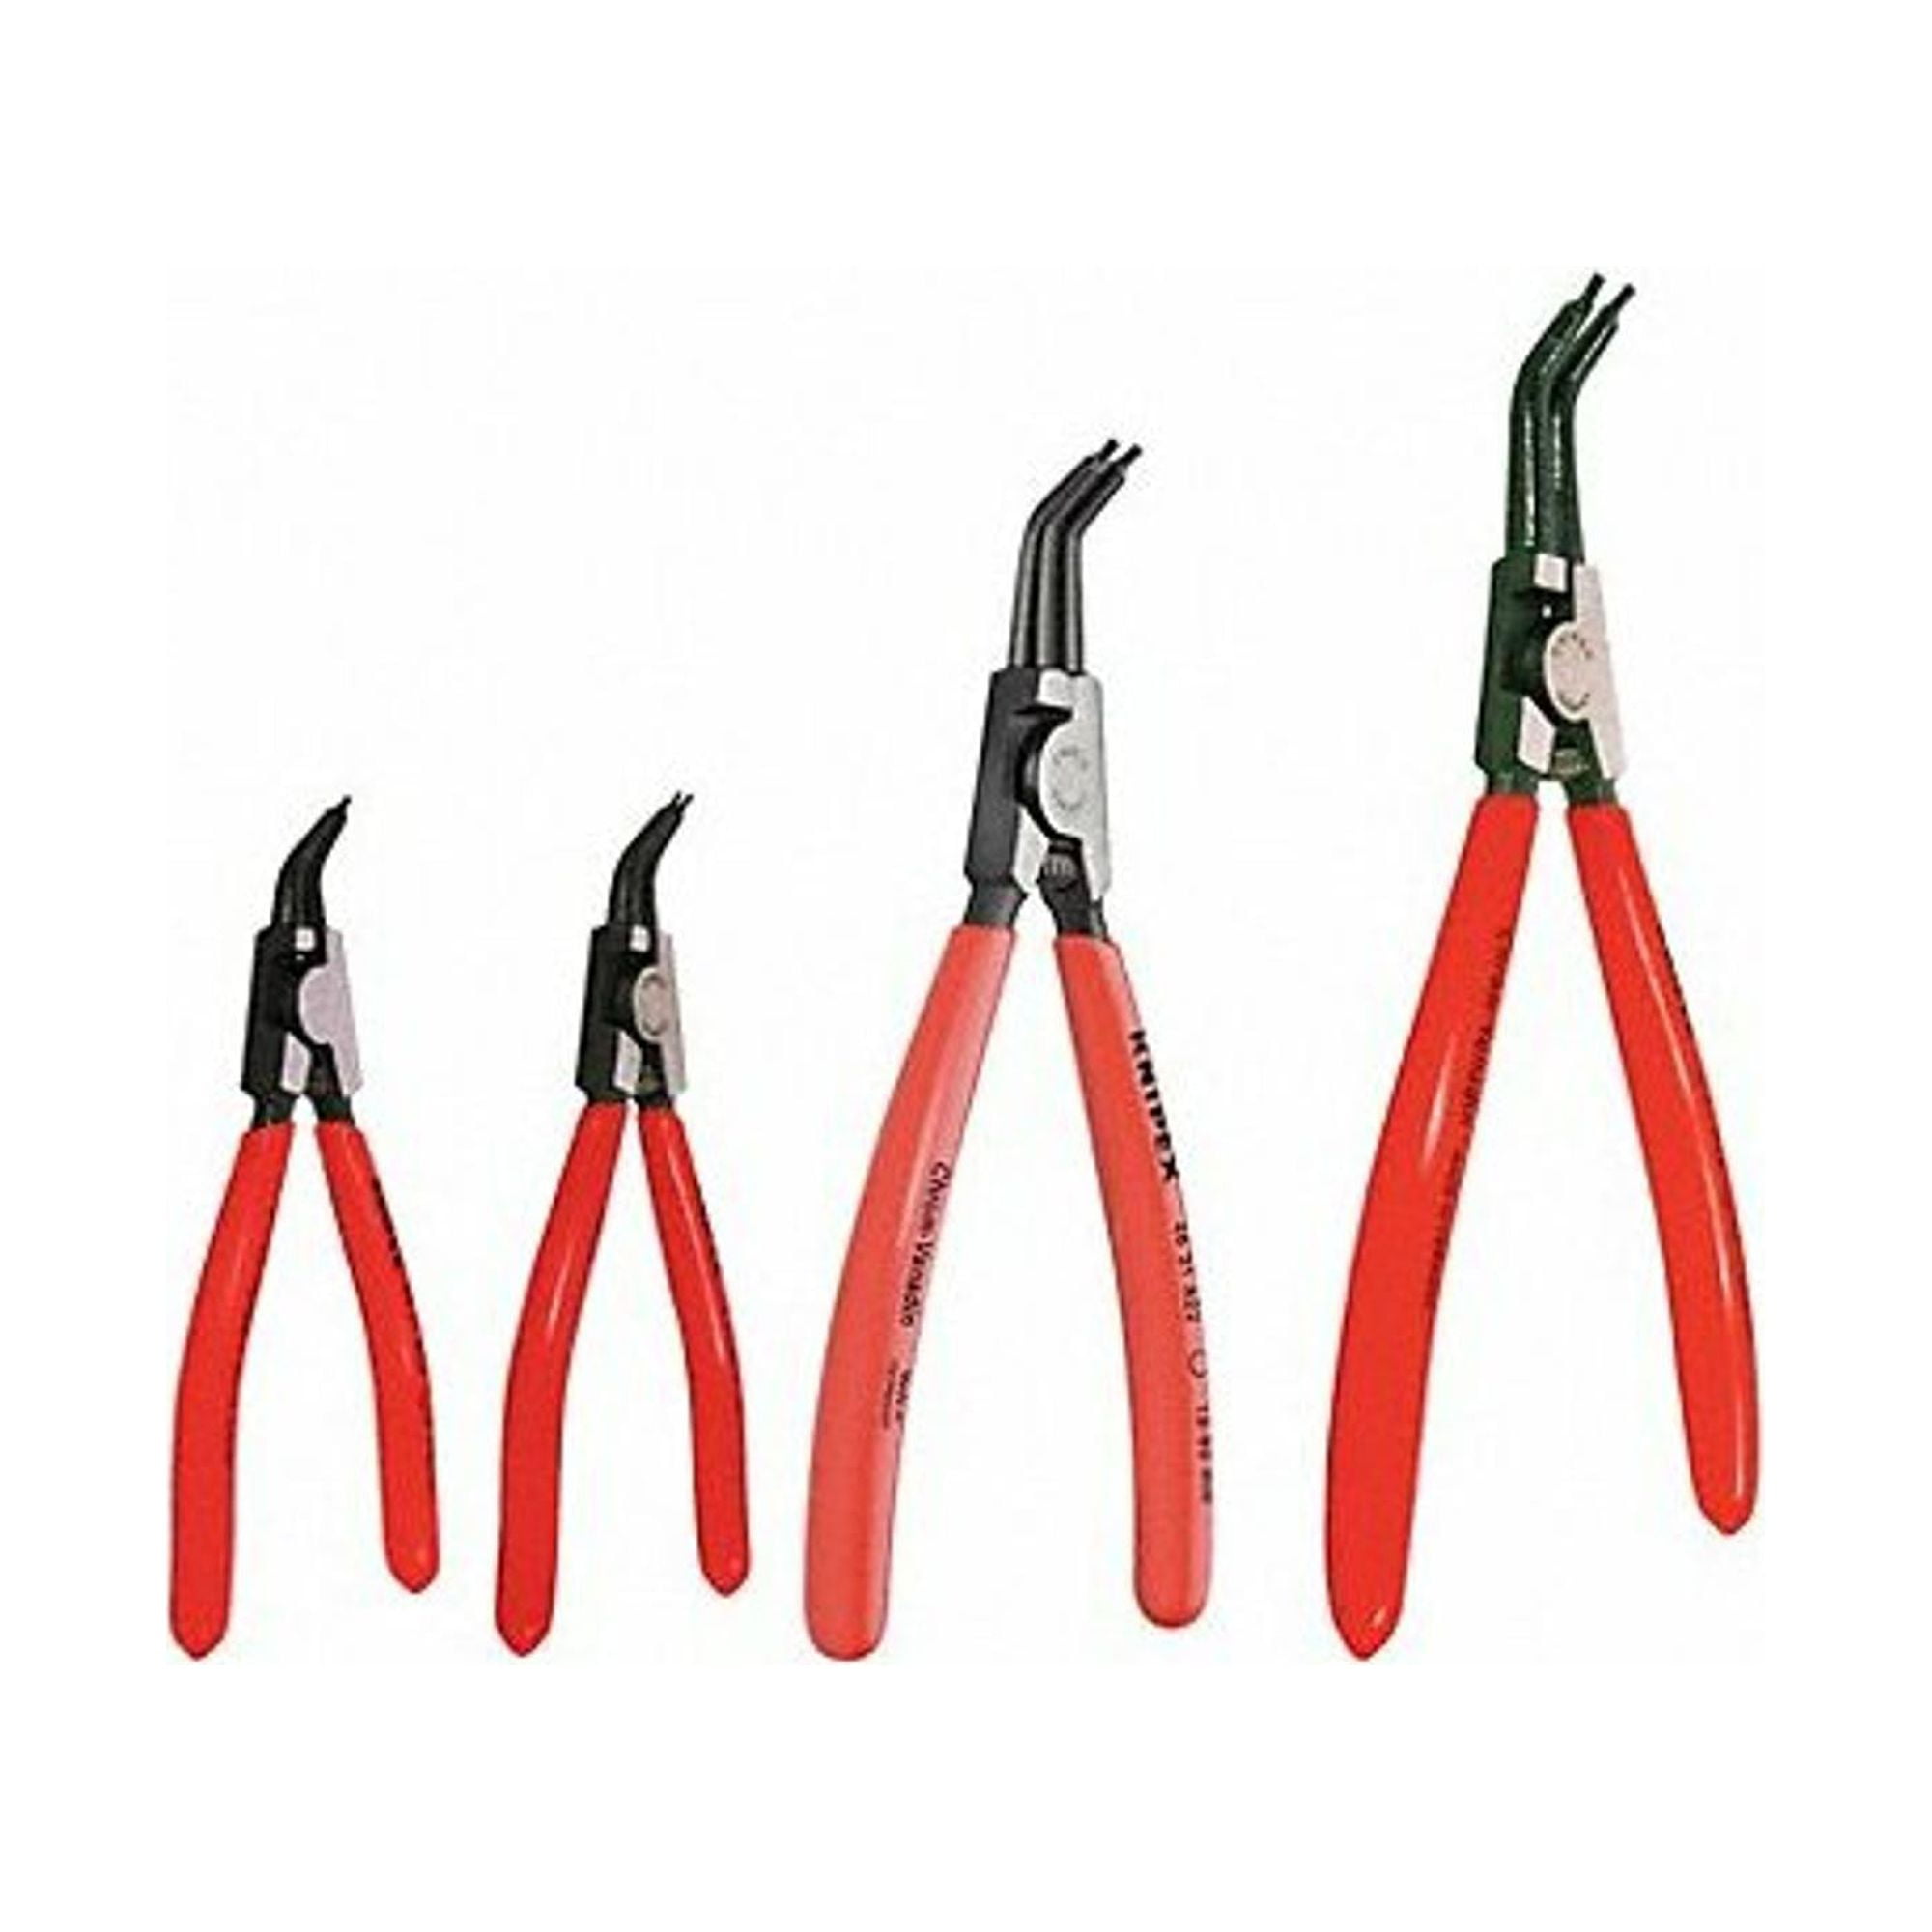 KNIPEX 4-Piece Circlip Snap-Ring Plier Set in Pouch - Automotive